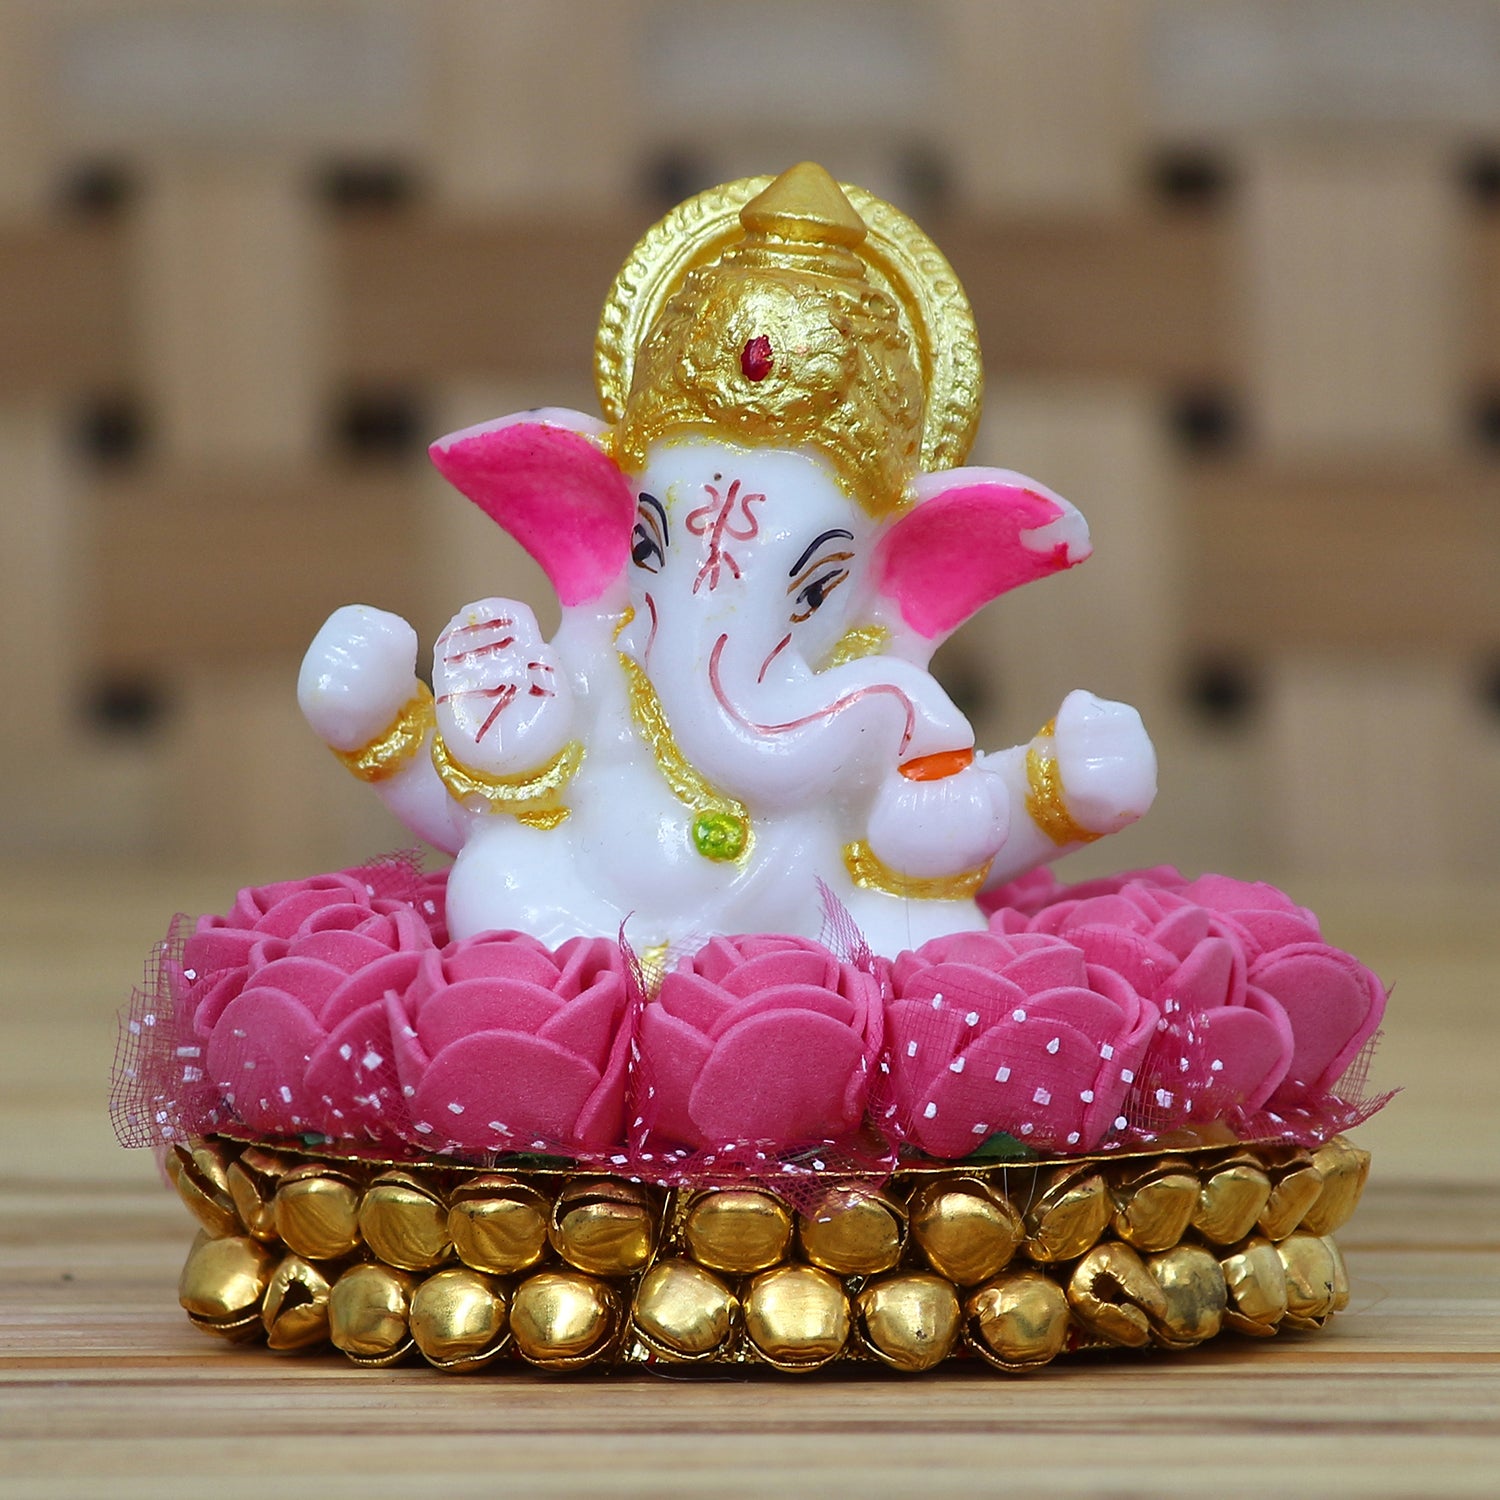 Polyresin Lord Ganesha Idol on Decorative Handcrafted Plate with Pink Flowers 1